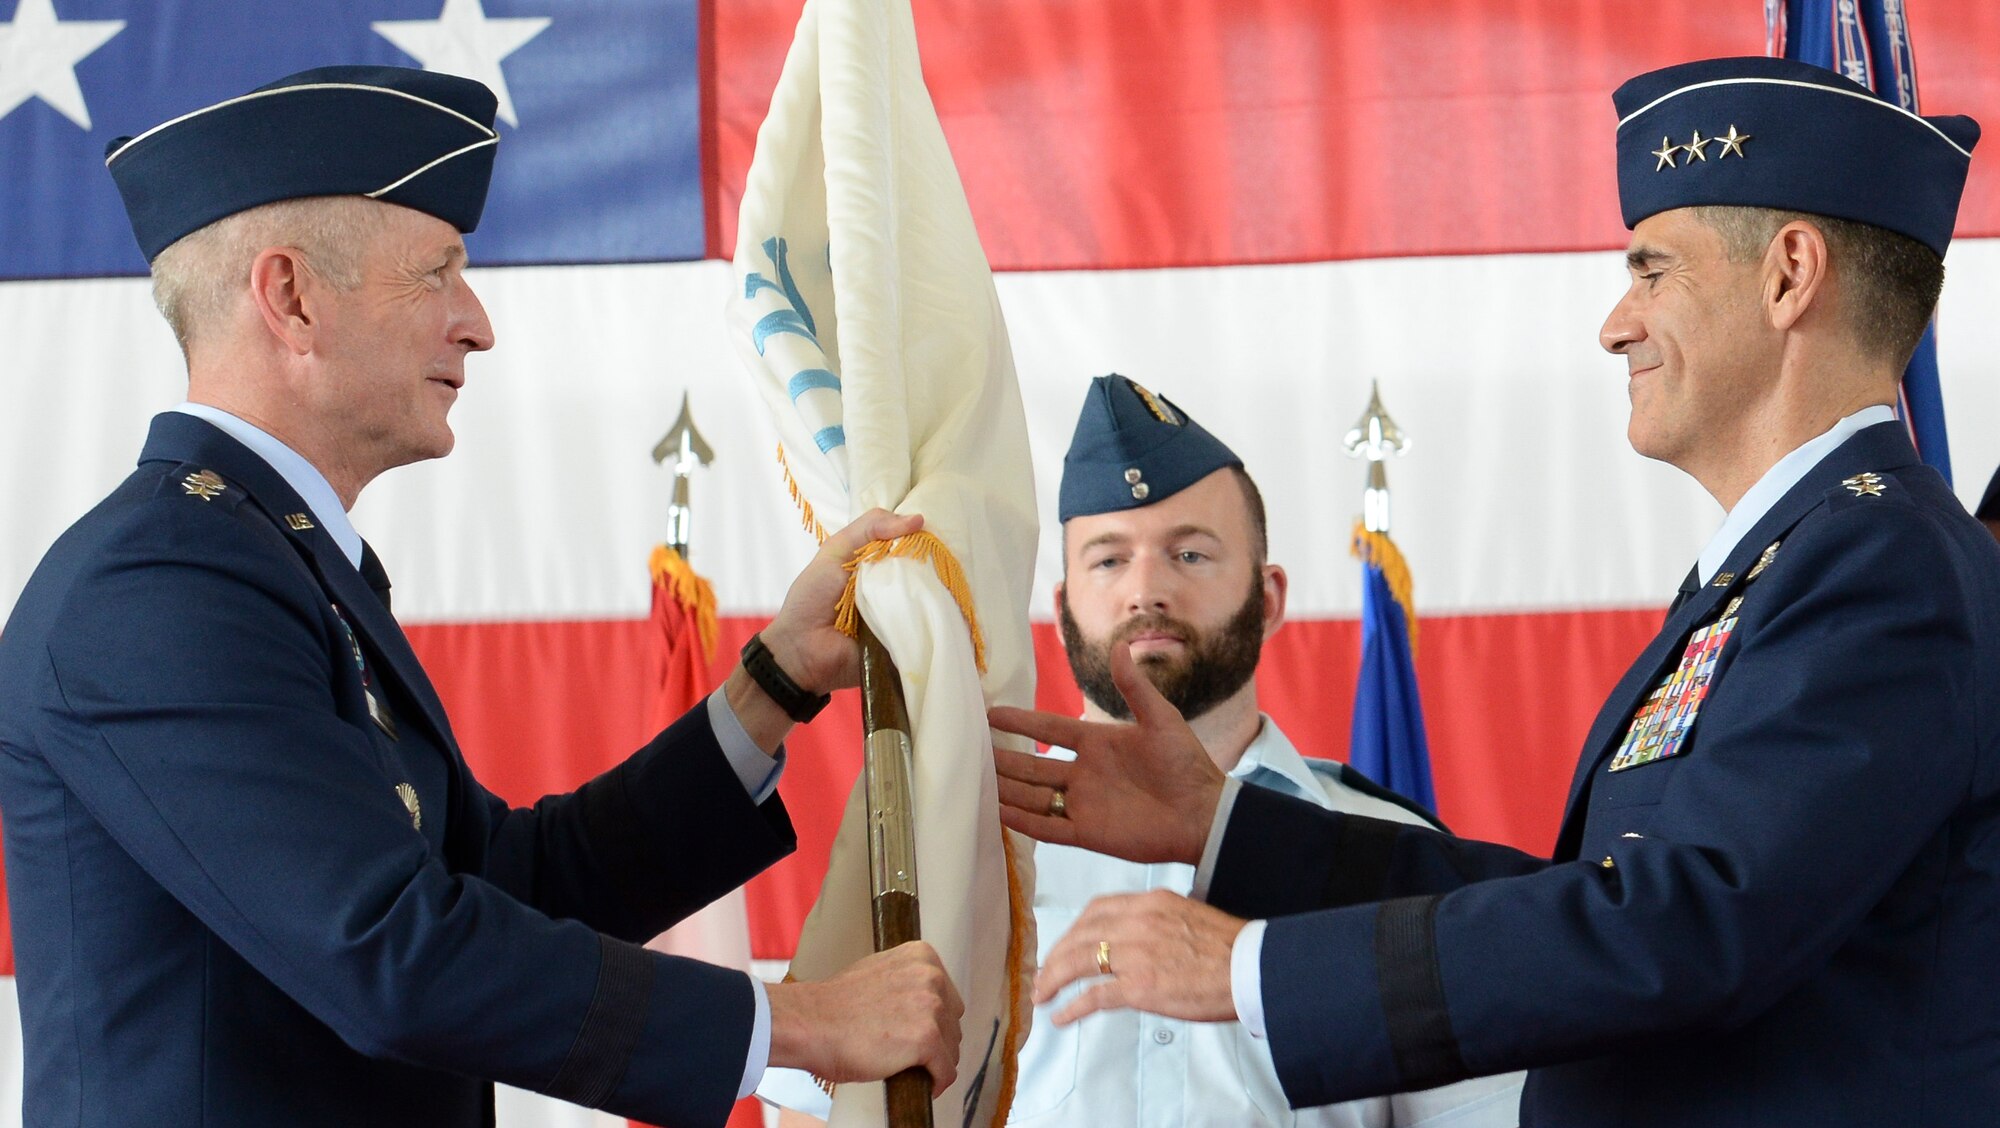 U.S. Air Force Lt. Gen. Marc Sasseville, commander, 1 AF (Air Forces Northern) and Continental U.S. North American Aerospace Defense Command Region (CONR) accepts the CONR (AFNORTH) guidon from General Terrance O’Shaughnessy, commander, United States Northern Command and North American Aerospace Defense Command, during a change of command ceremony June 20, 2019, Tyndall AFB, Fla.  O’Shaughnessy, along with General James Holmes, commander, Air Combat Command, officiated the 1 AF, CONR (AFNORTH) Change of Command.